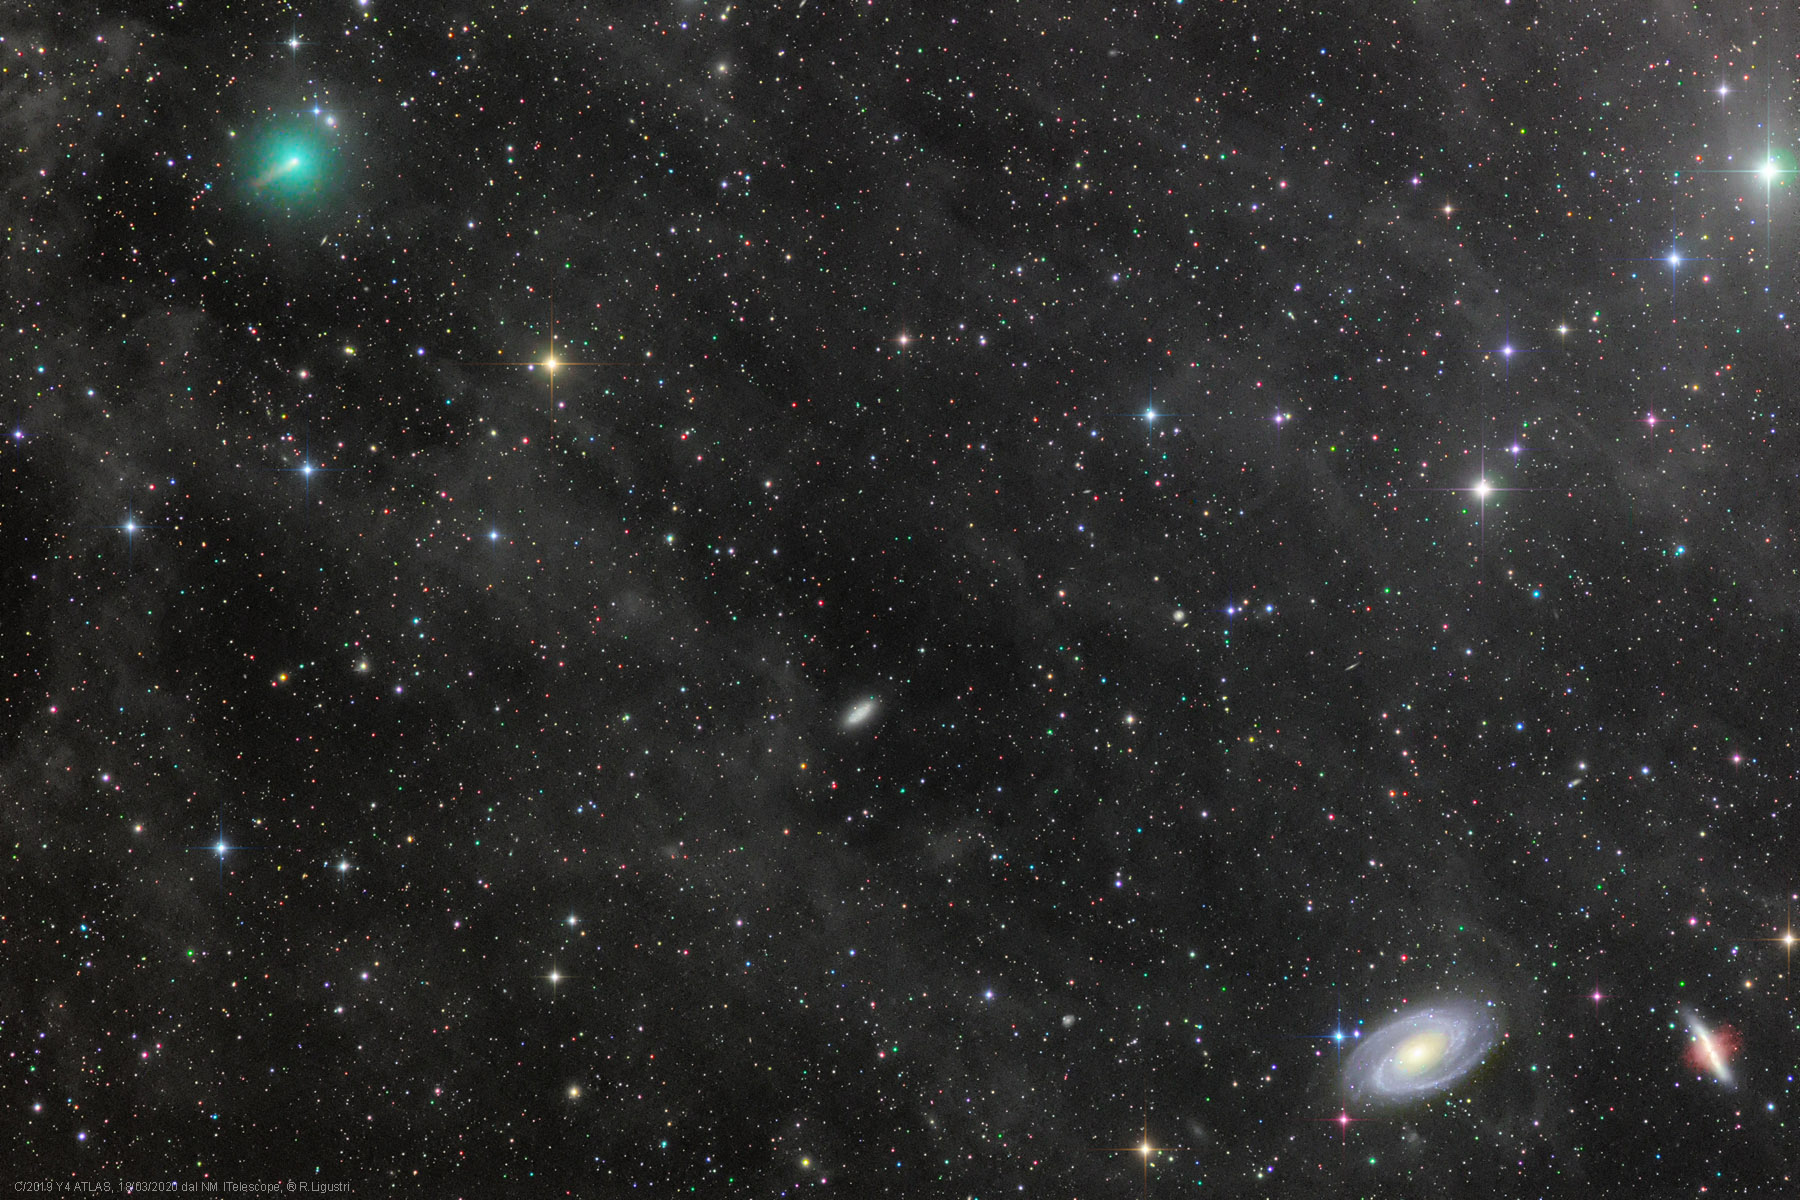 Comet ATLAS and the Mighty Galaxies